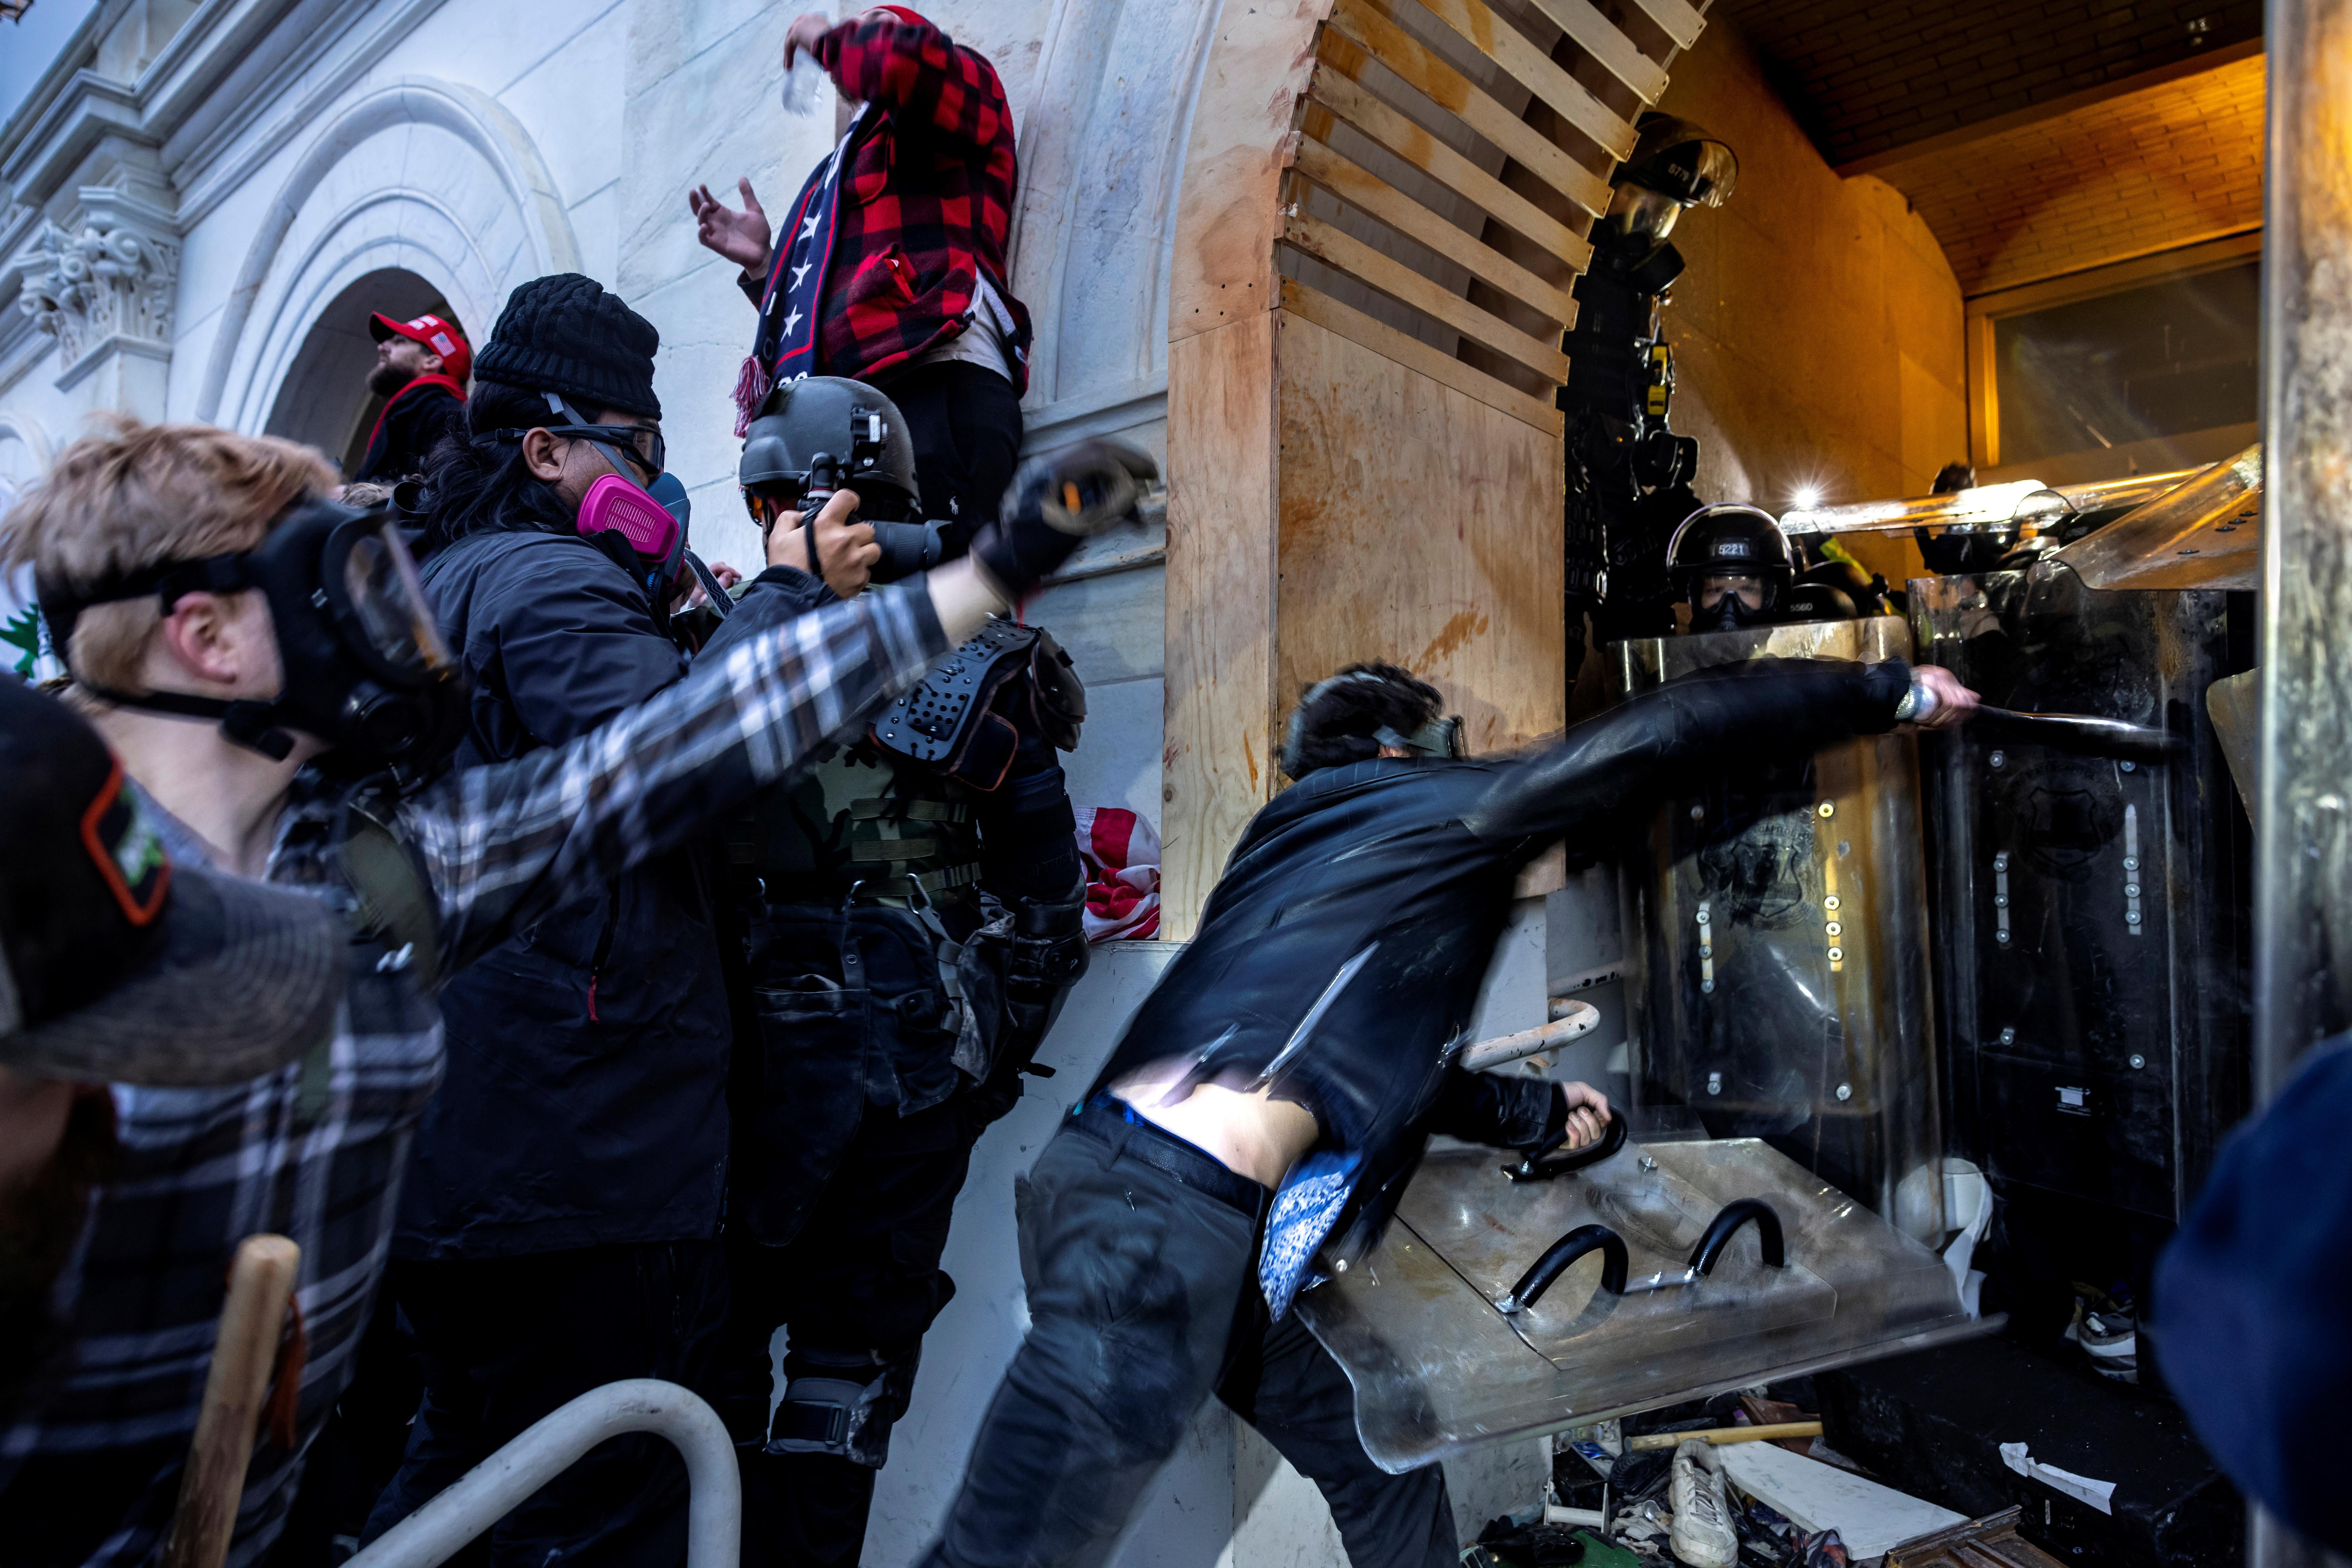 Masked rioters assault law enforcement officers at an entryway to the Capitol.